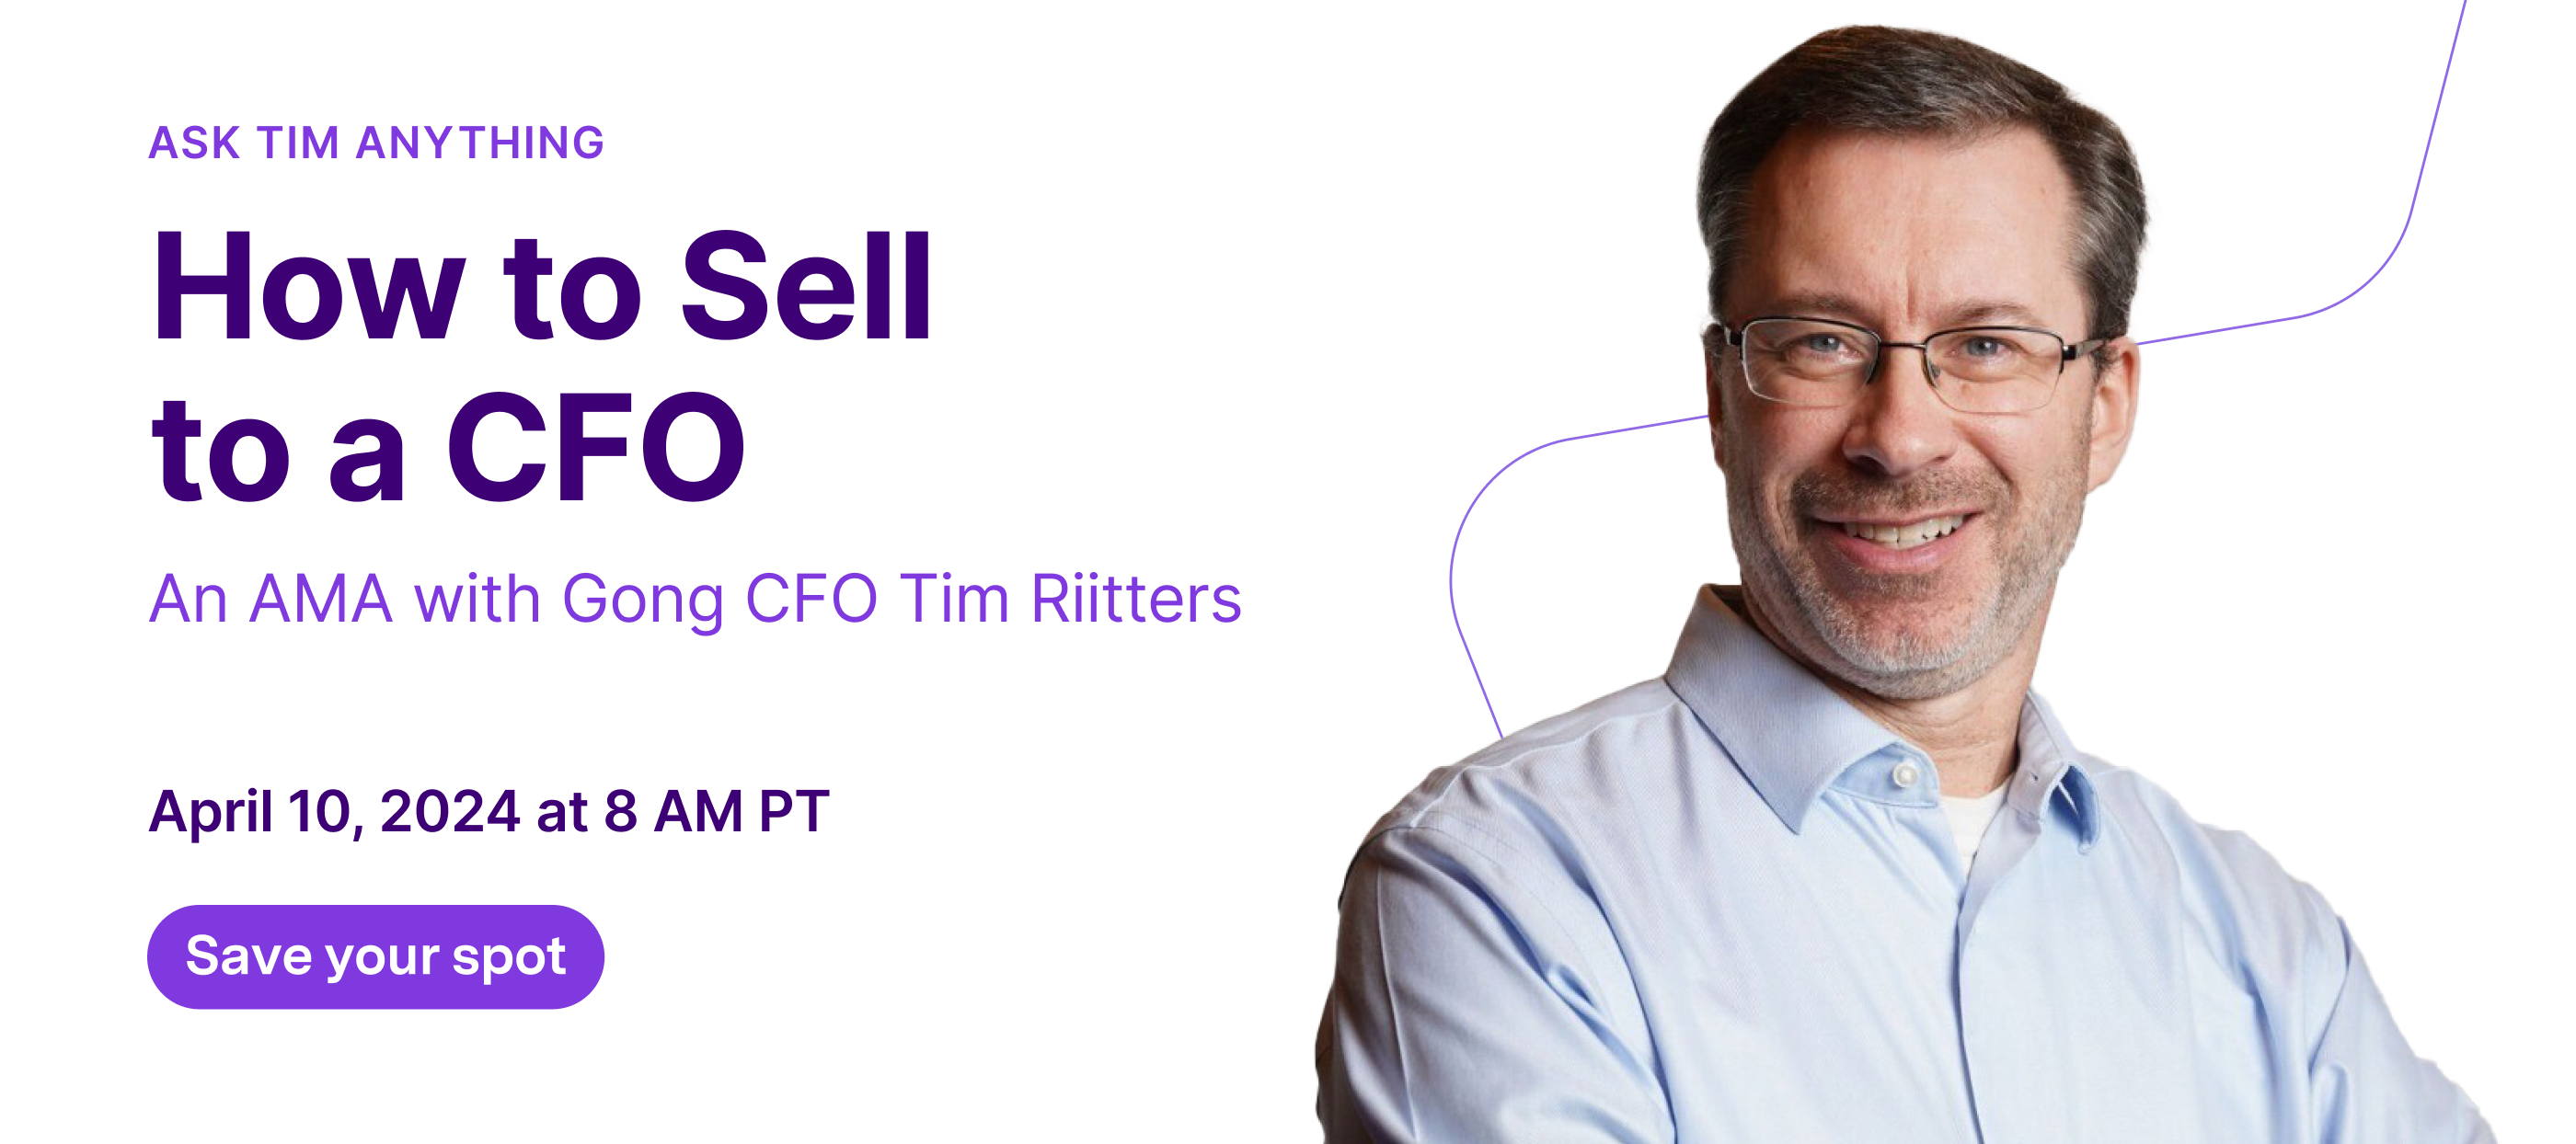 YOU’RE INVITED: Ask Tim anything about selling to a CFO!